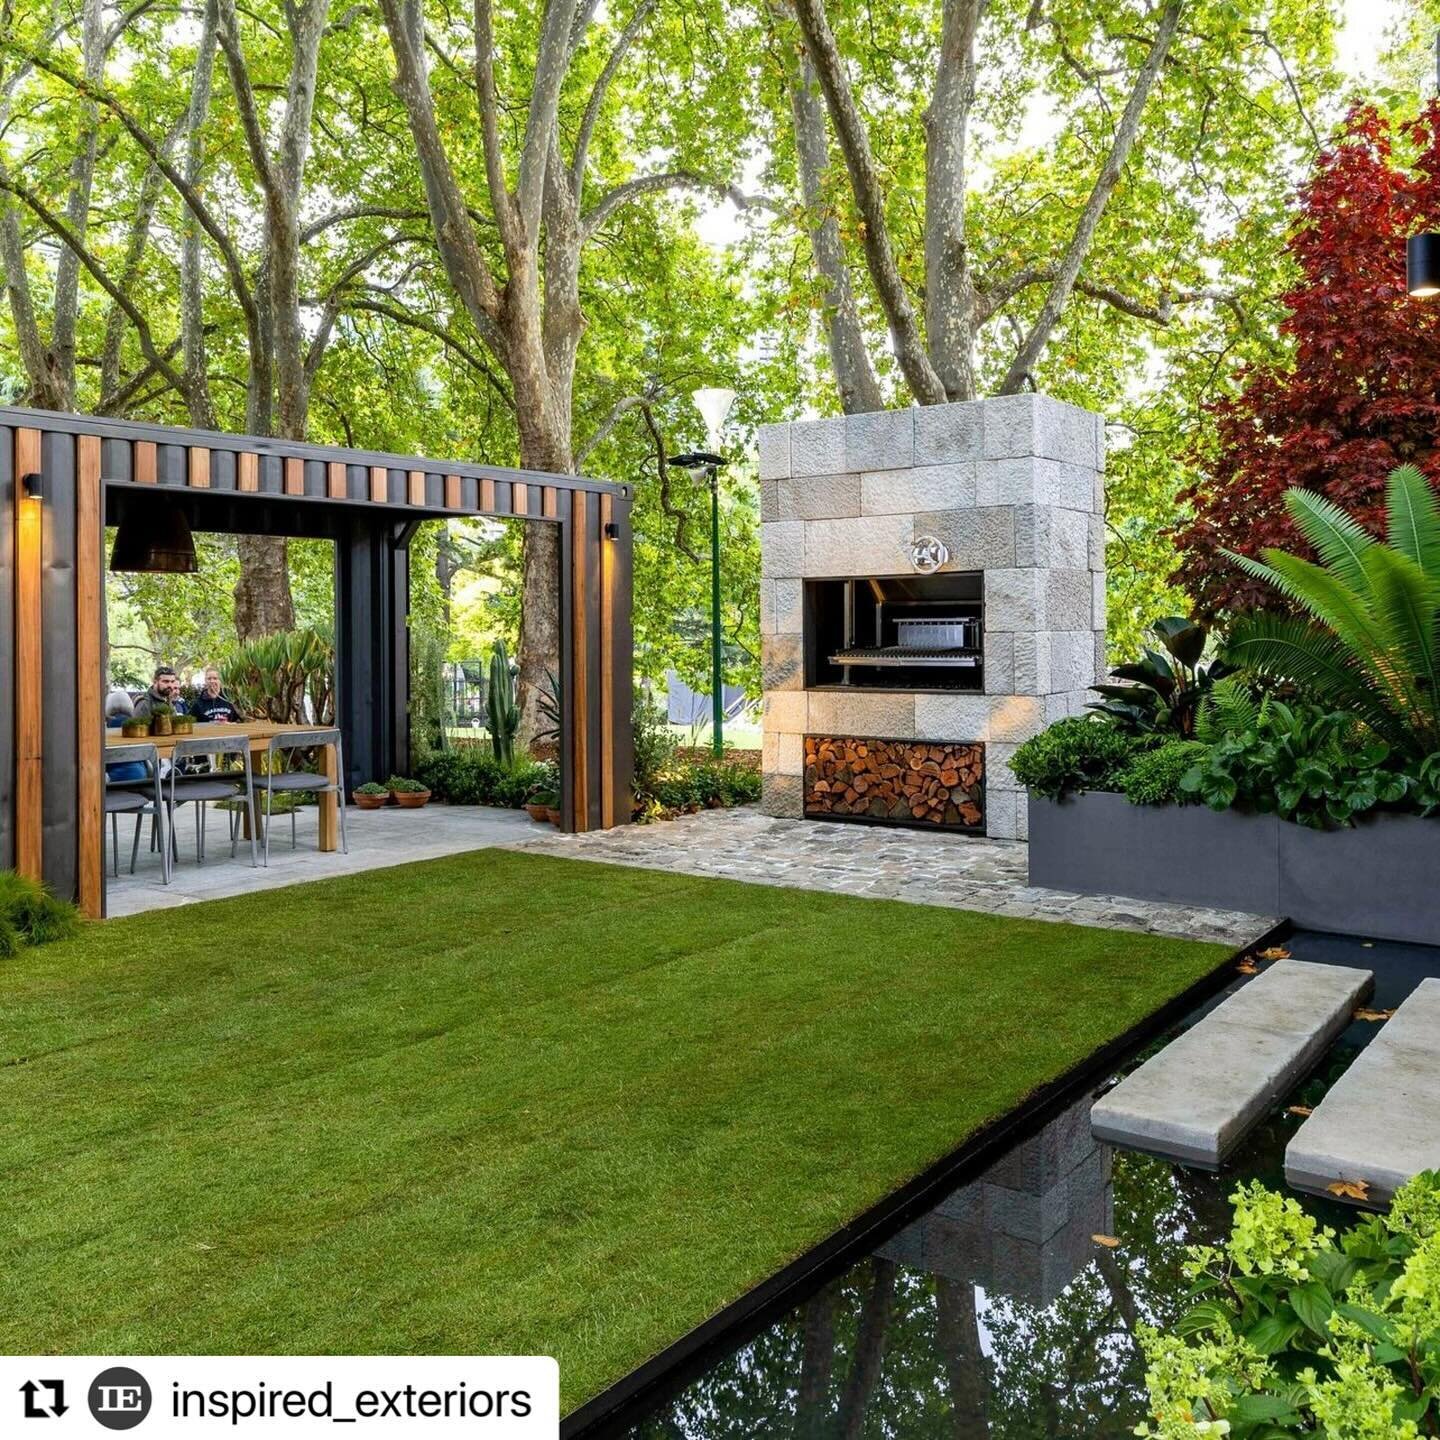 Looking forward to meeting up with my @ecooutdoor friends to scope out the new LA showroom and home for a very lucky grill!
.

#Repost @inspired_exteriors with @use.repost
・・・
Our Gold Medal-winning Melbourne show garden is a true masterpiece that em